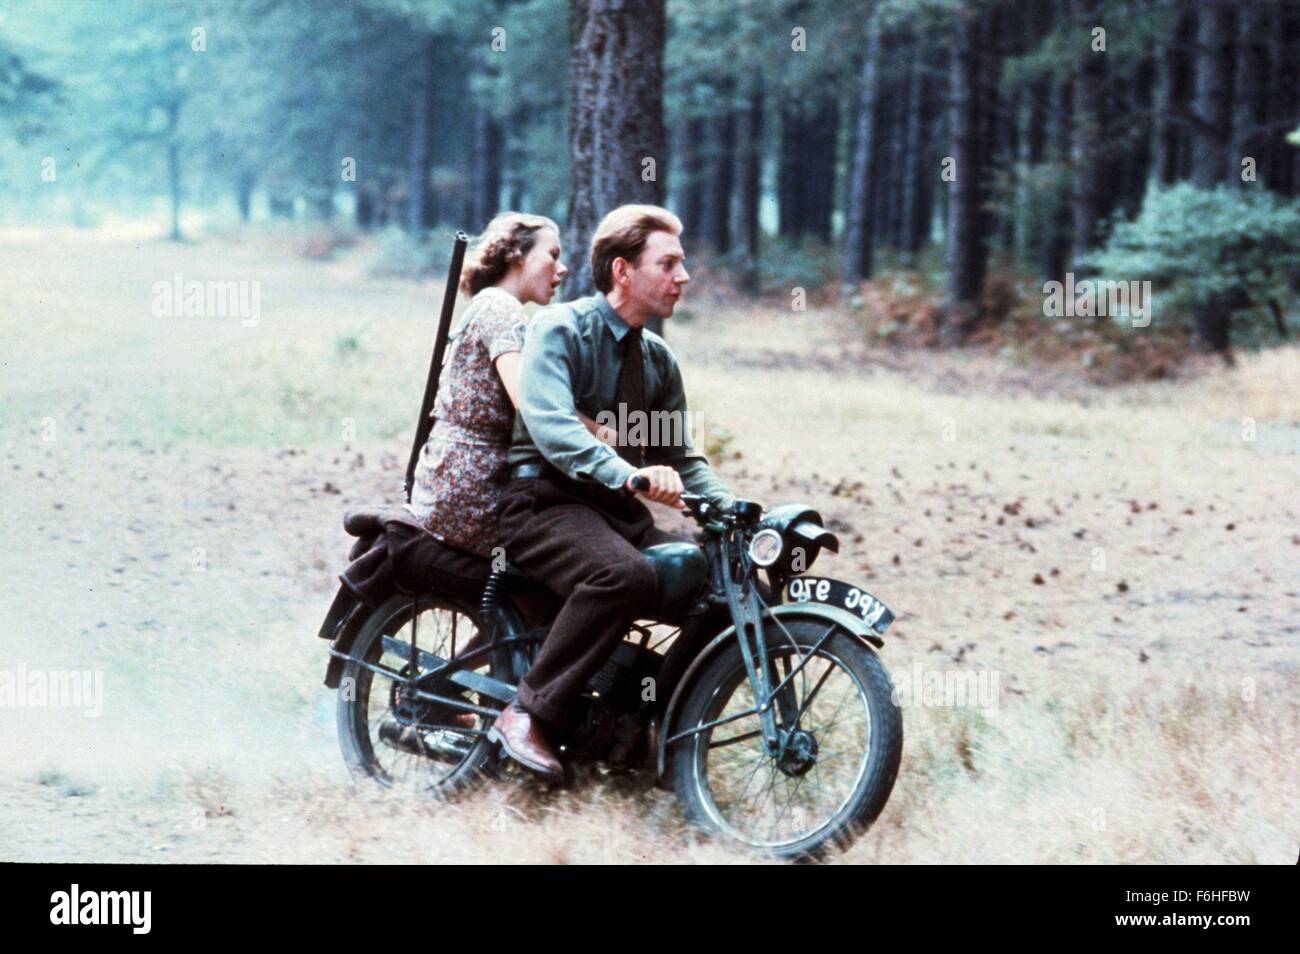 1977, Film Title: EAGLE HAS LANDED, Director: JOHN STURGES, Pictured: JENNY AGUTTER, MOTORCYCLE, GUN, DONALD SUTHERLAND, VEHICLE, TANDEM, DOUBLE, PASSENGER, FOREST, WOOD, RIDING, WAR. (Credit Image: SNAP) Stock Photo